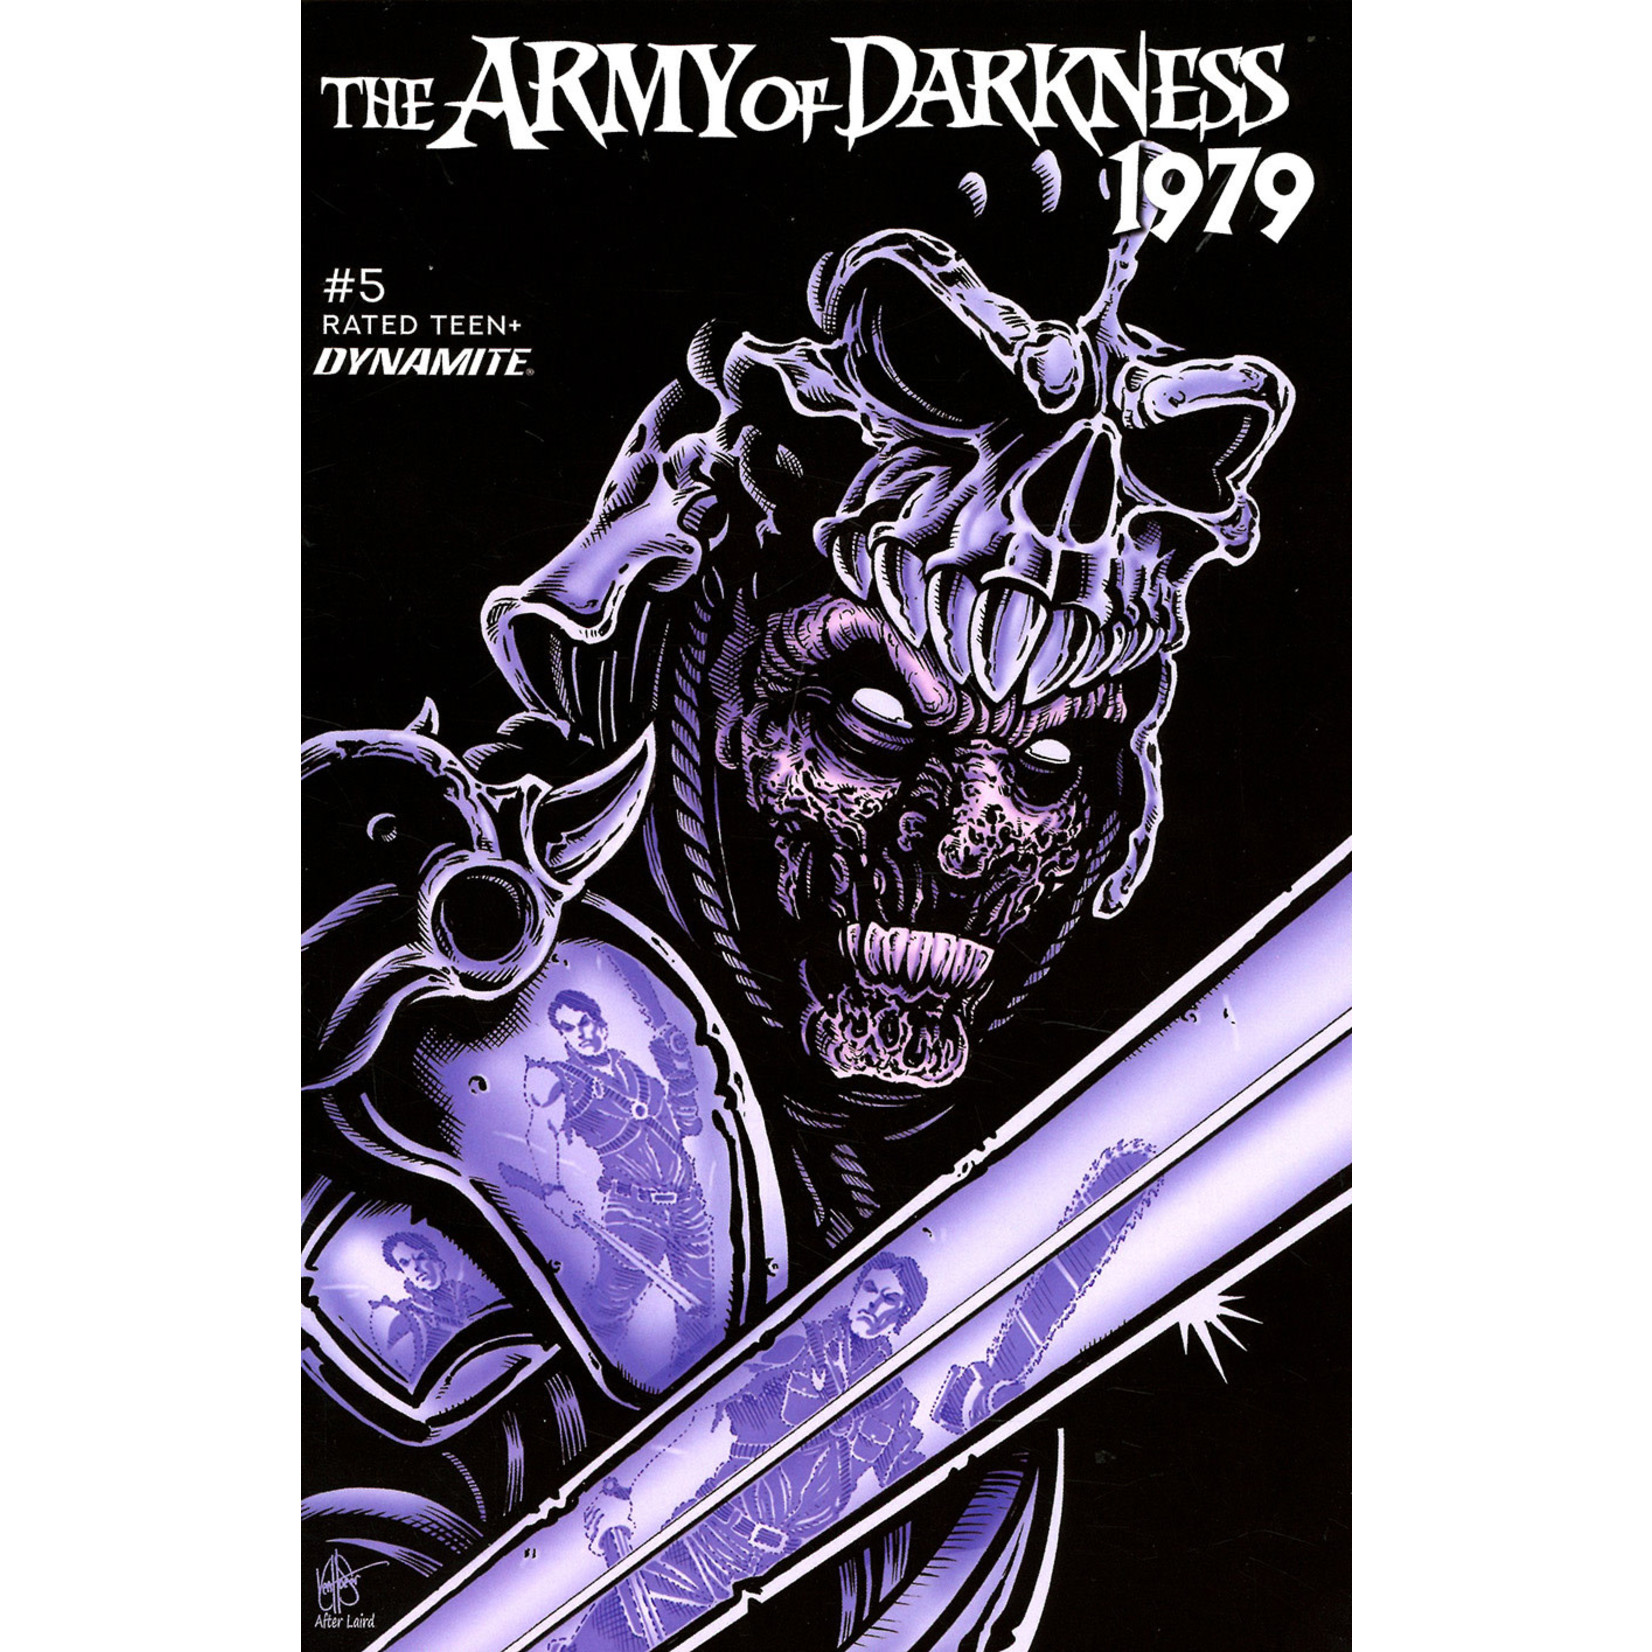 Dynamite Army Of Darkness 1979 #5 Cover L Variant Ken Haeser TMNT Homage Cover